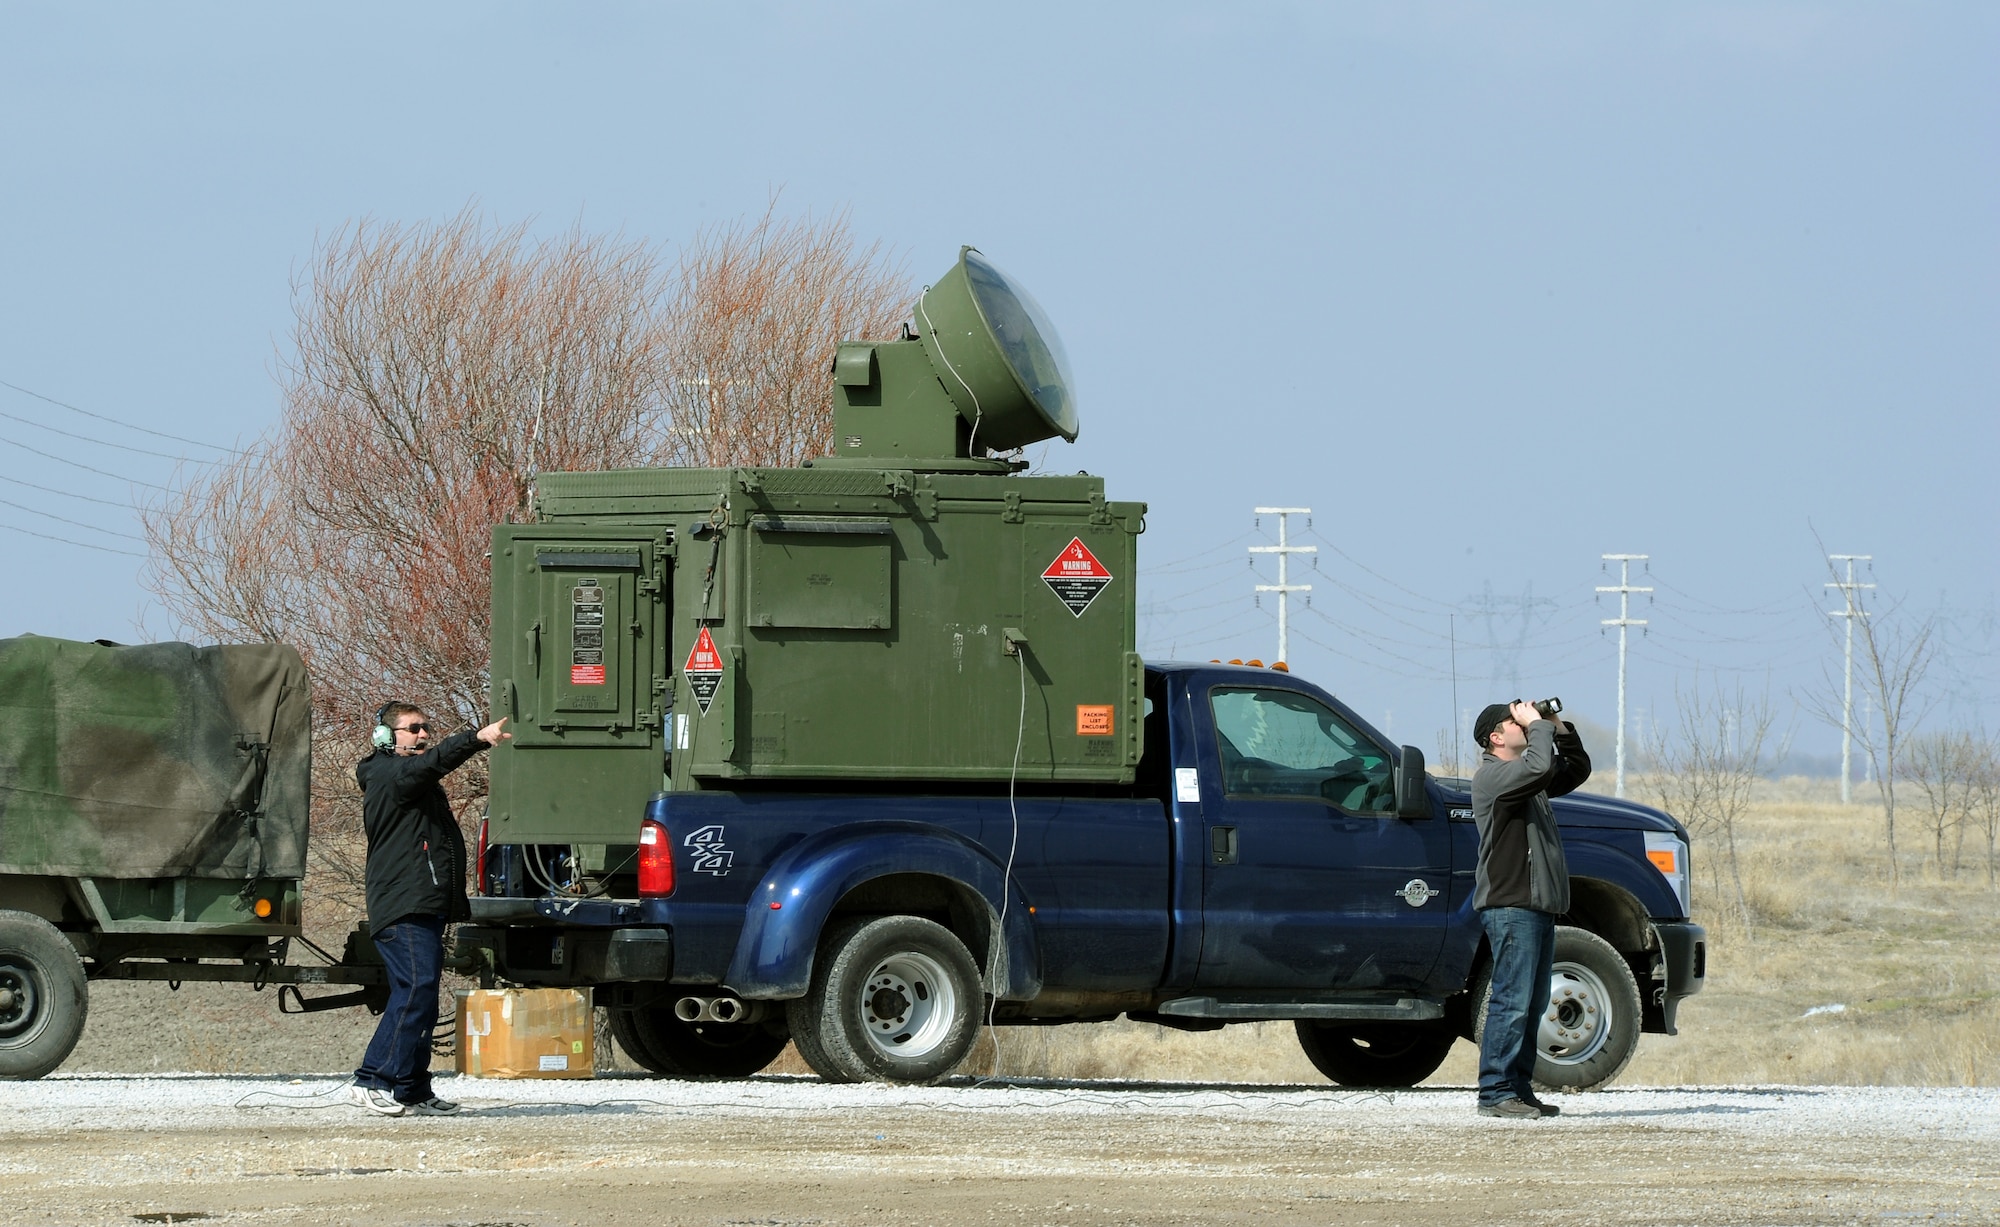 KONY, Turkey – Lance Geyer, Polygone quality assurance inspector, and Carl Gessman, Polygone radar operator, spot aircraft for a tactical radar threat generator during Anatolian Falcon 2012 in Konya, Turkey, March 8. Polygone operated the radar throughout the exercise to provide a simulated enemy ground threat capability to the participating aircraft. (U.S. Air Force photo/Staff Sgt. Benjamin Wilson)